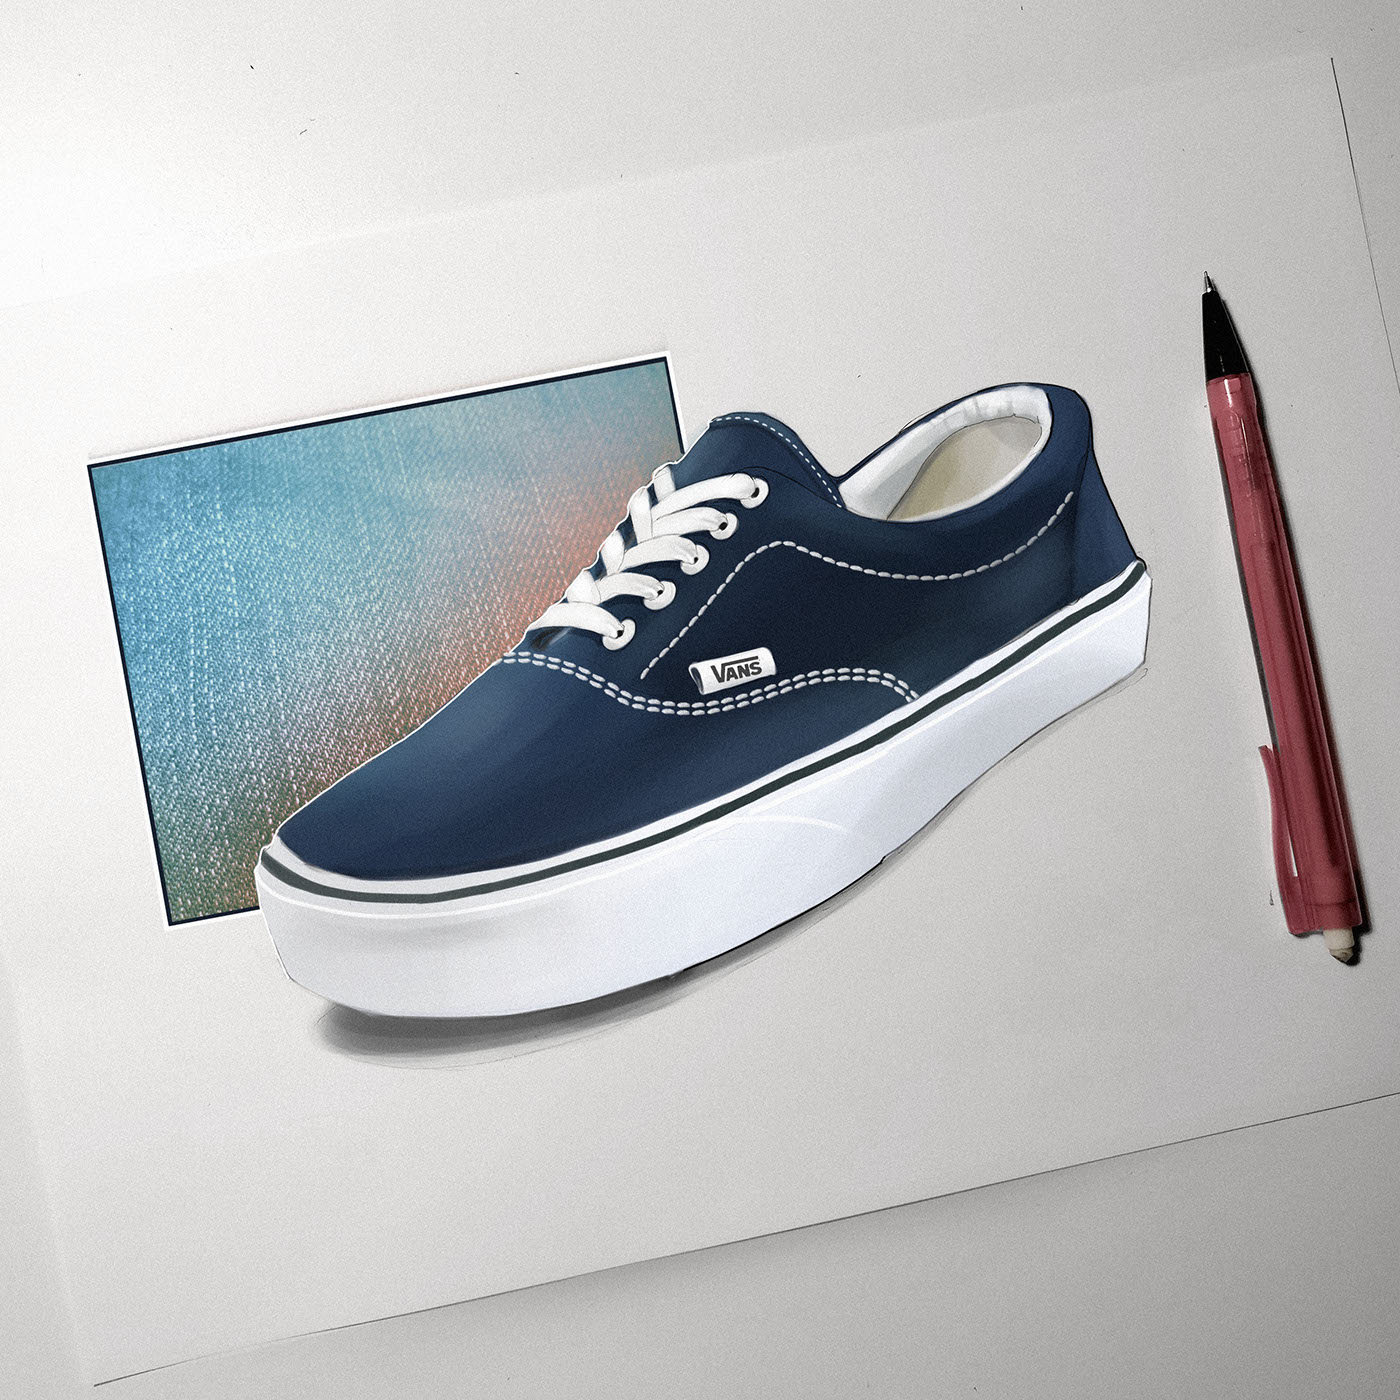 sketch product sketches Industrial Design sketches product illustration ILLUSTRATION  Photoshop renders product design 